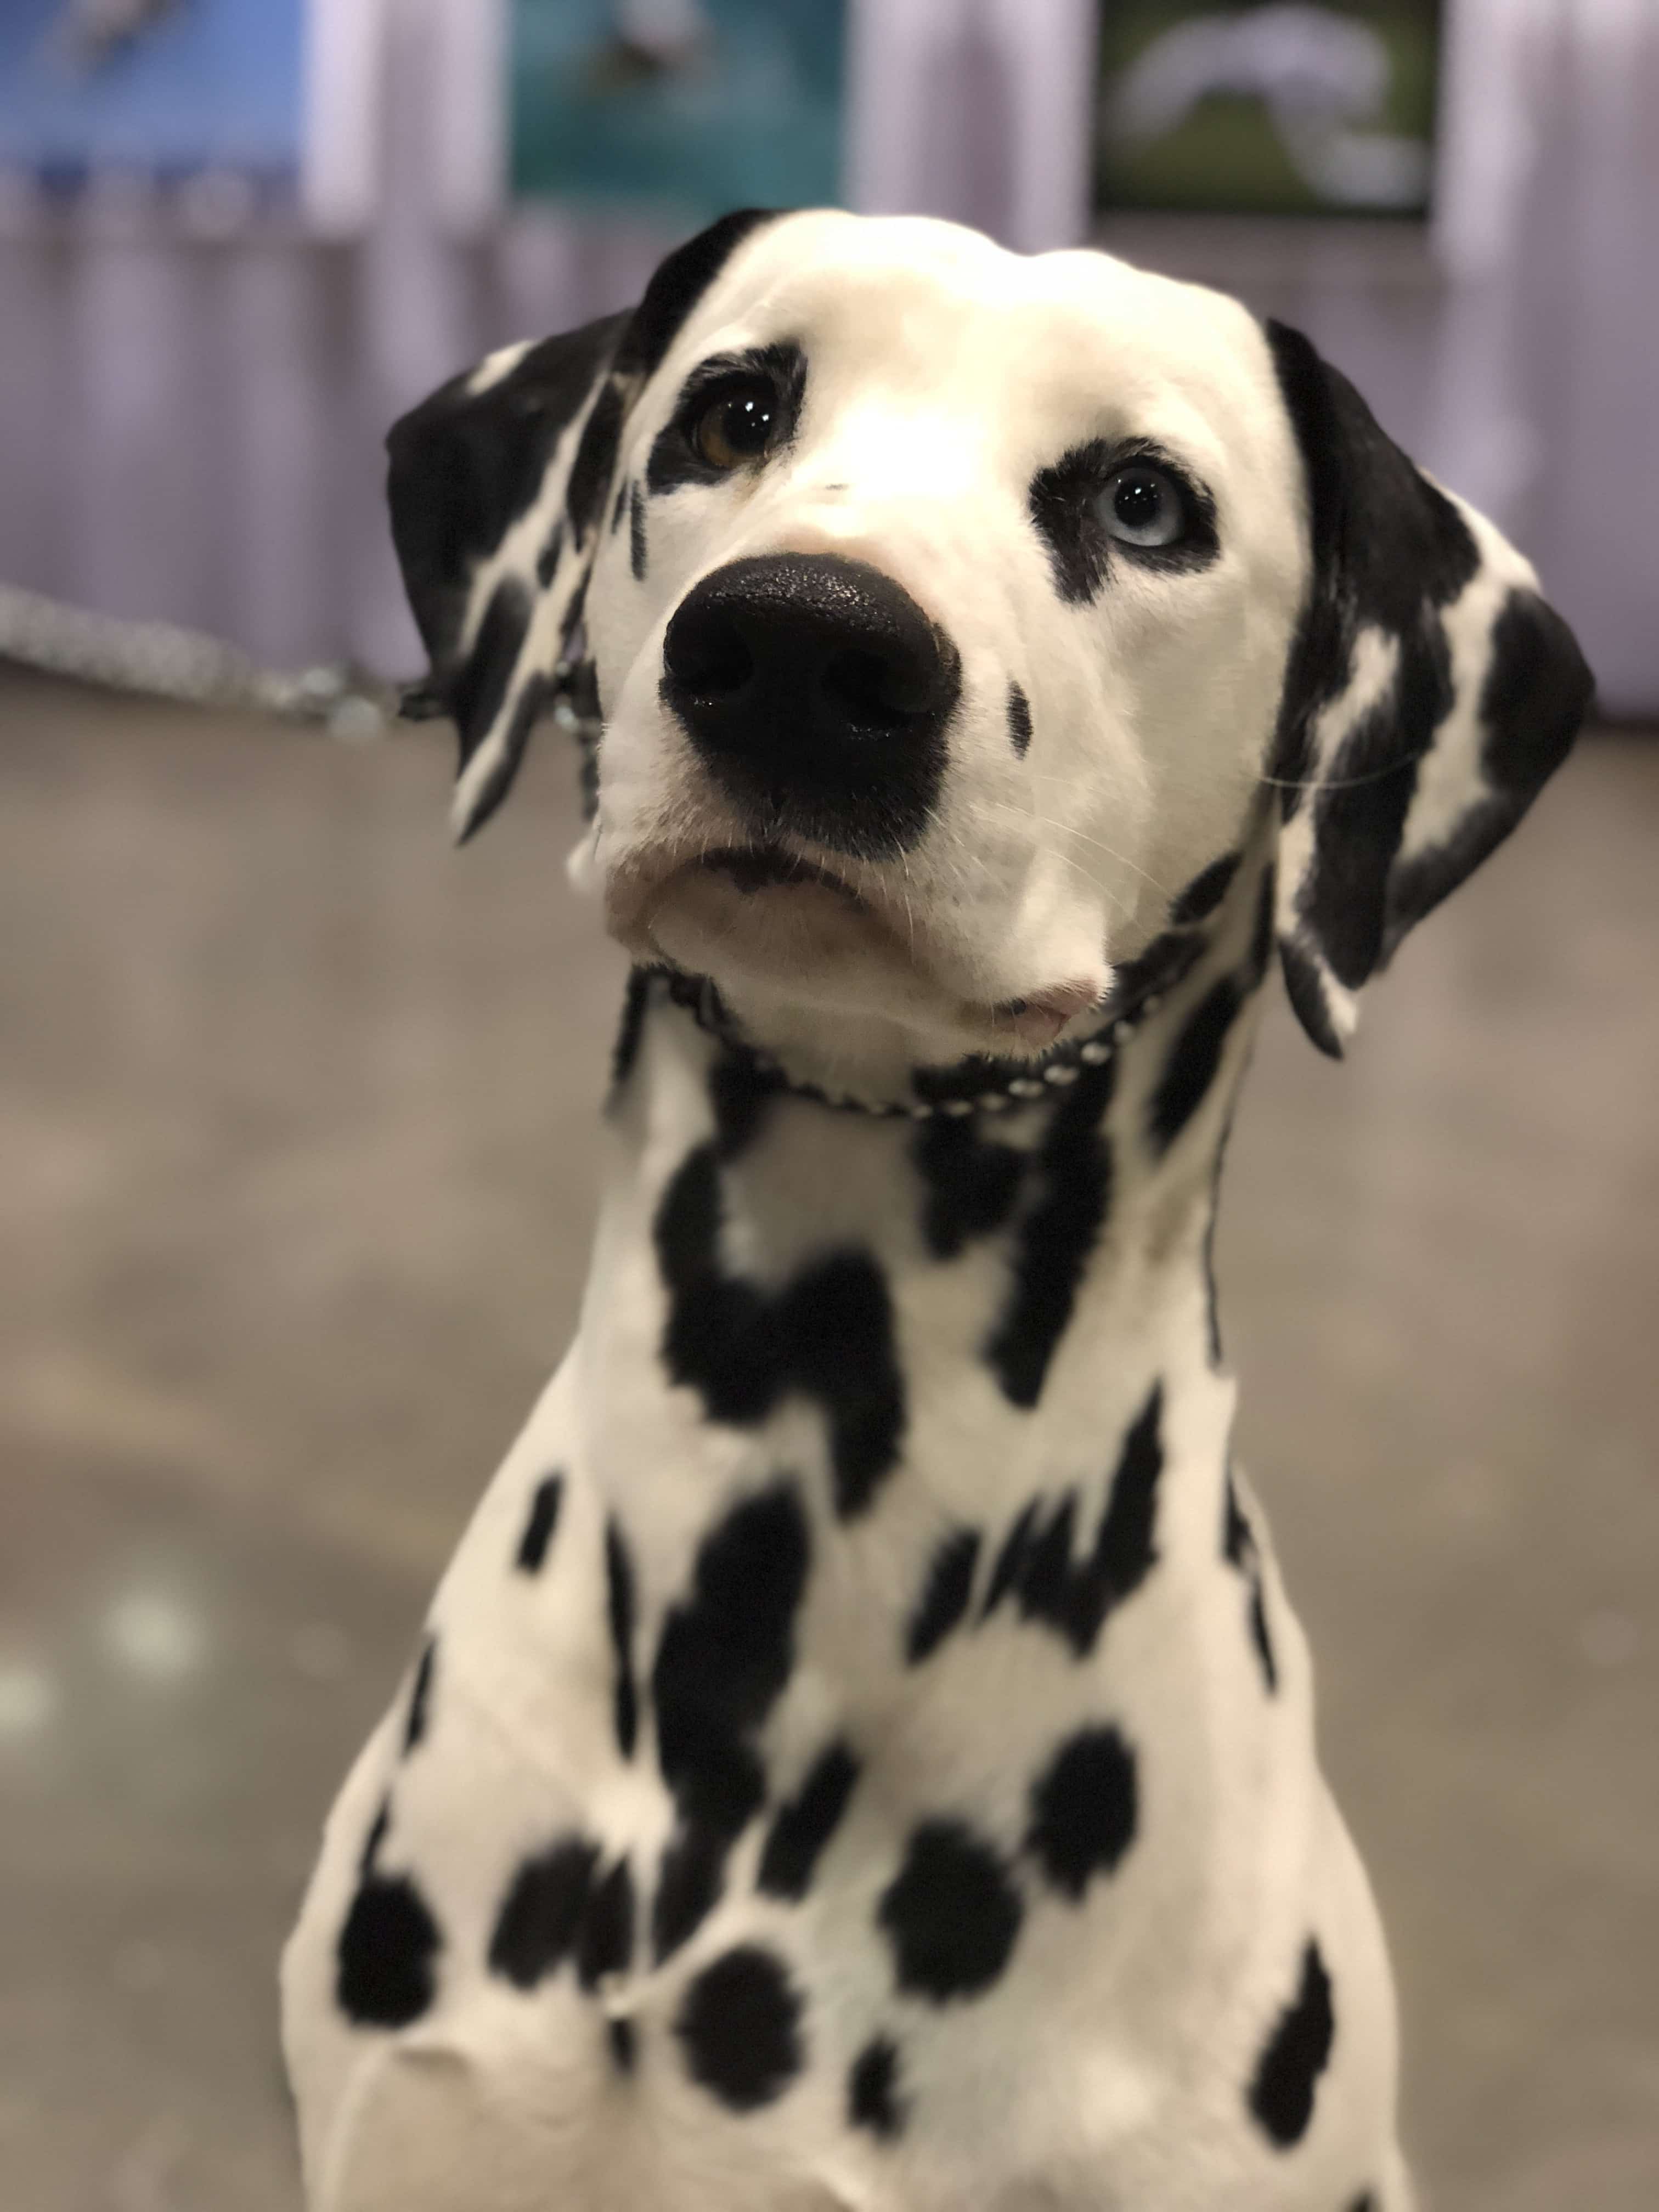 An Insider's Guide to the American Kennel Club Dog Show - Dalmatian Belle